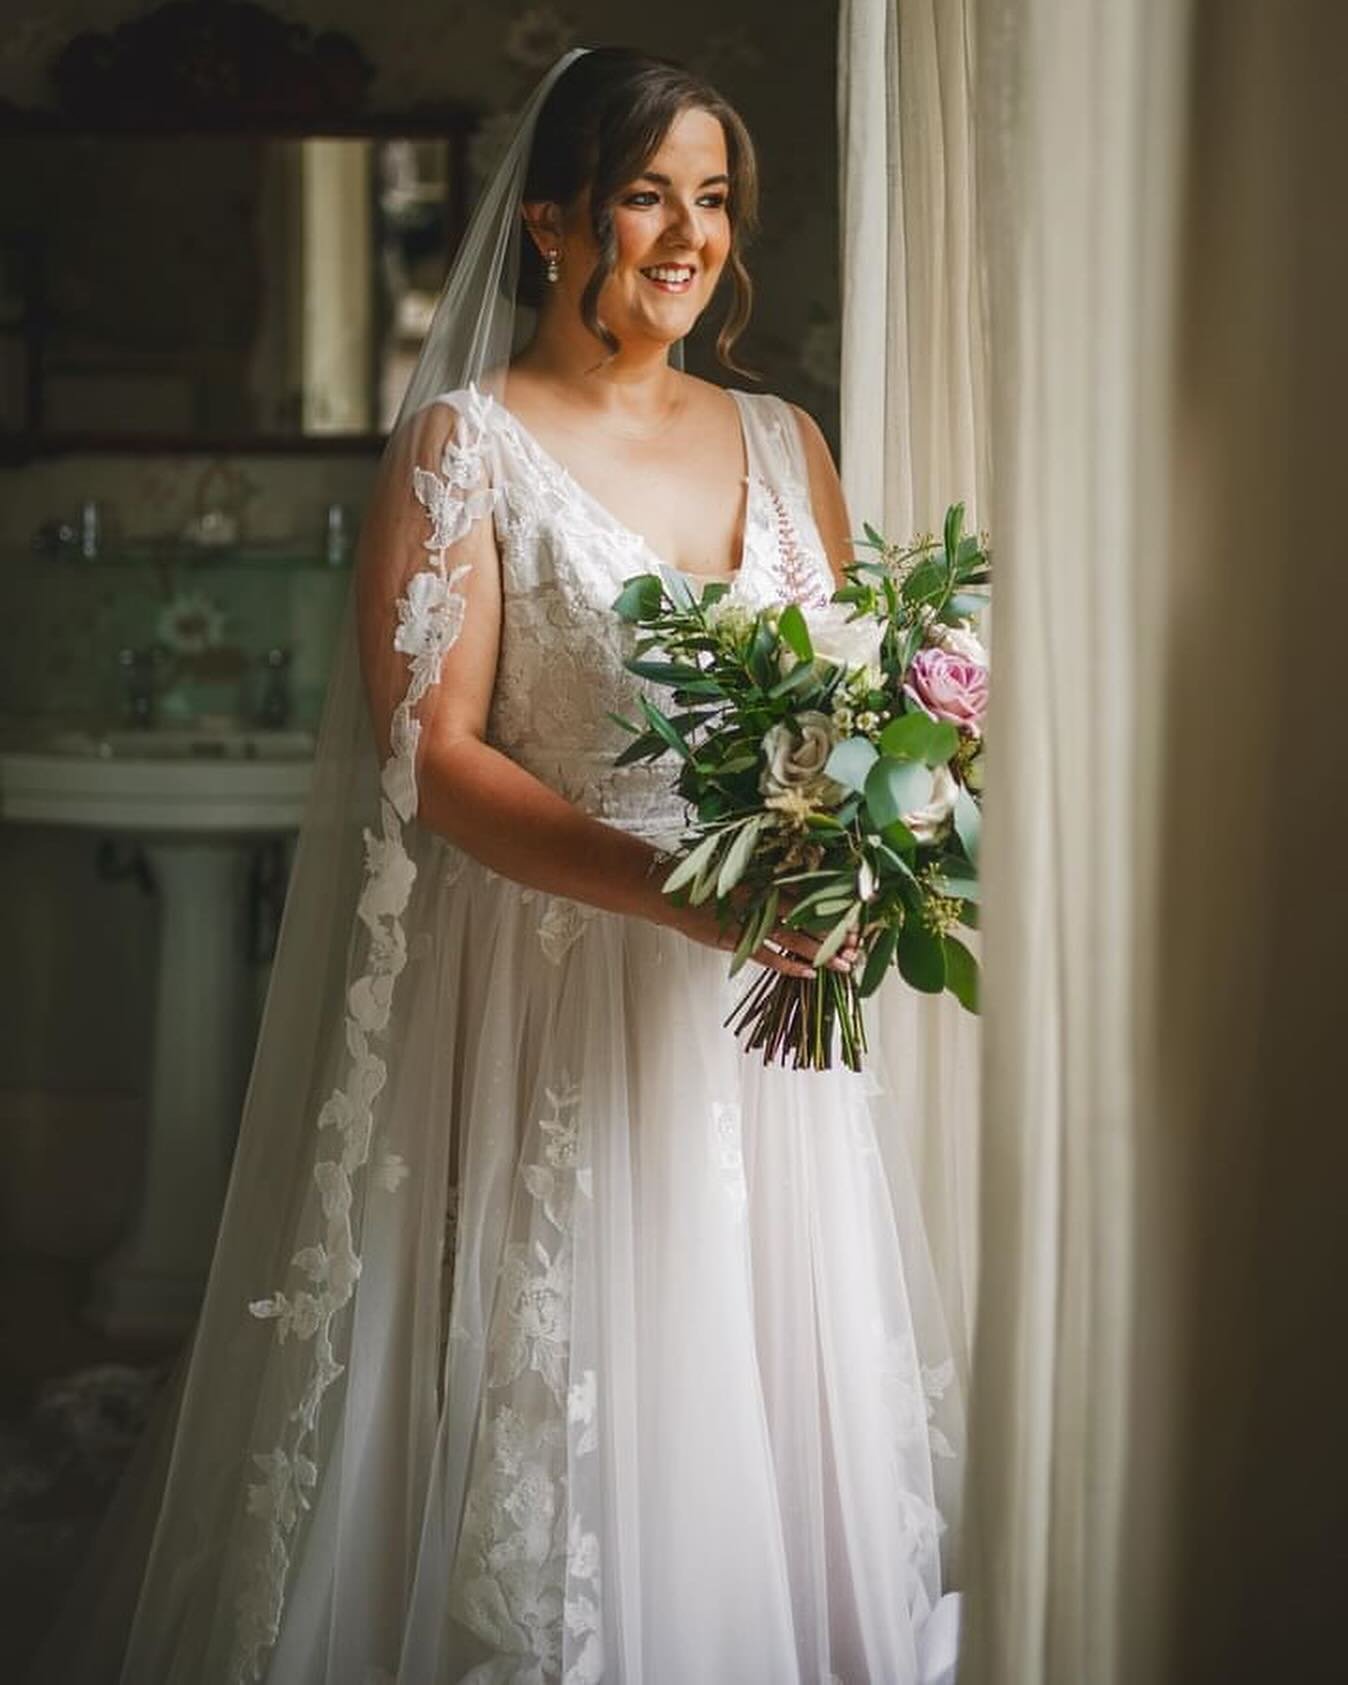 REAL BRIDE ALERT! 🌟

Check out our stunning Divinity bride, Claire, on her big day! 😍 You looked absolutely stunning, Claire! We had so much fun helping you find your dream dress and making sure your girlies found their perfect bridesmaid dresses t